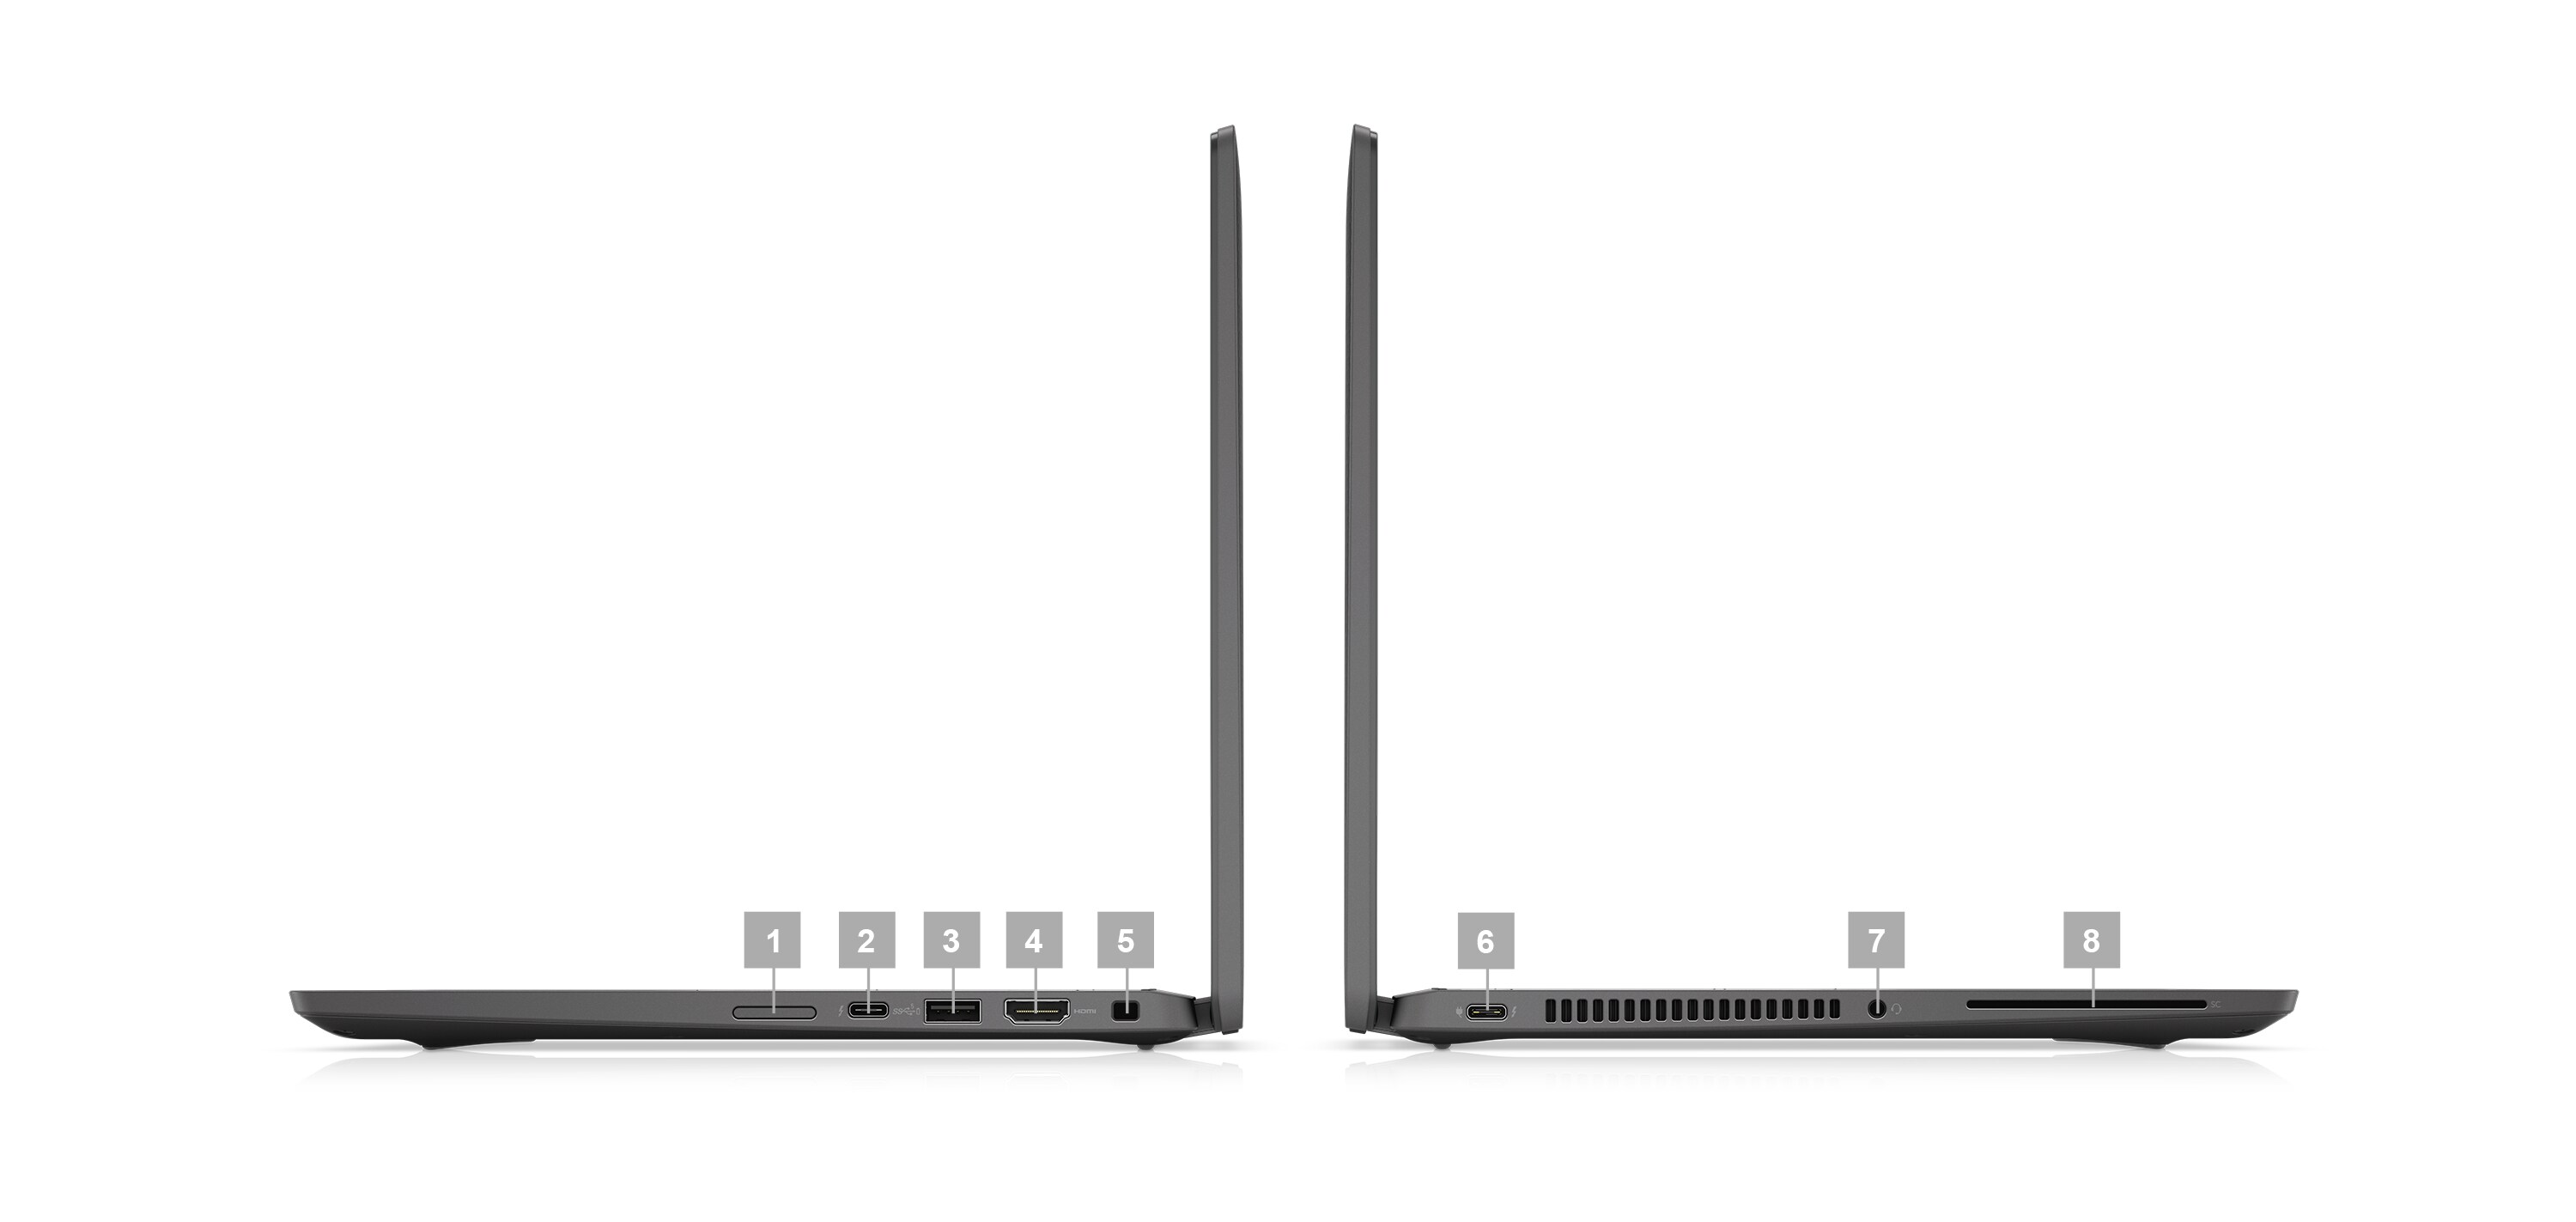 Picture of two Dell Latitude 14 2-in-1 7430 Laptops placed sideways with numbers from 1 to 8 signaling the product ports.